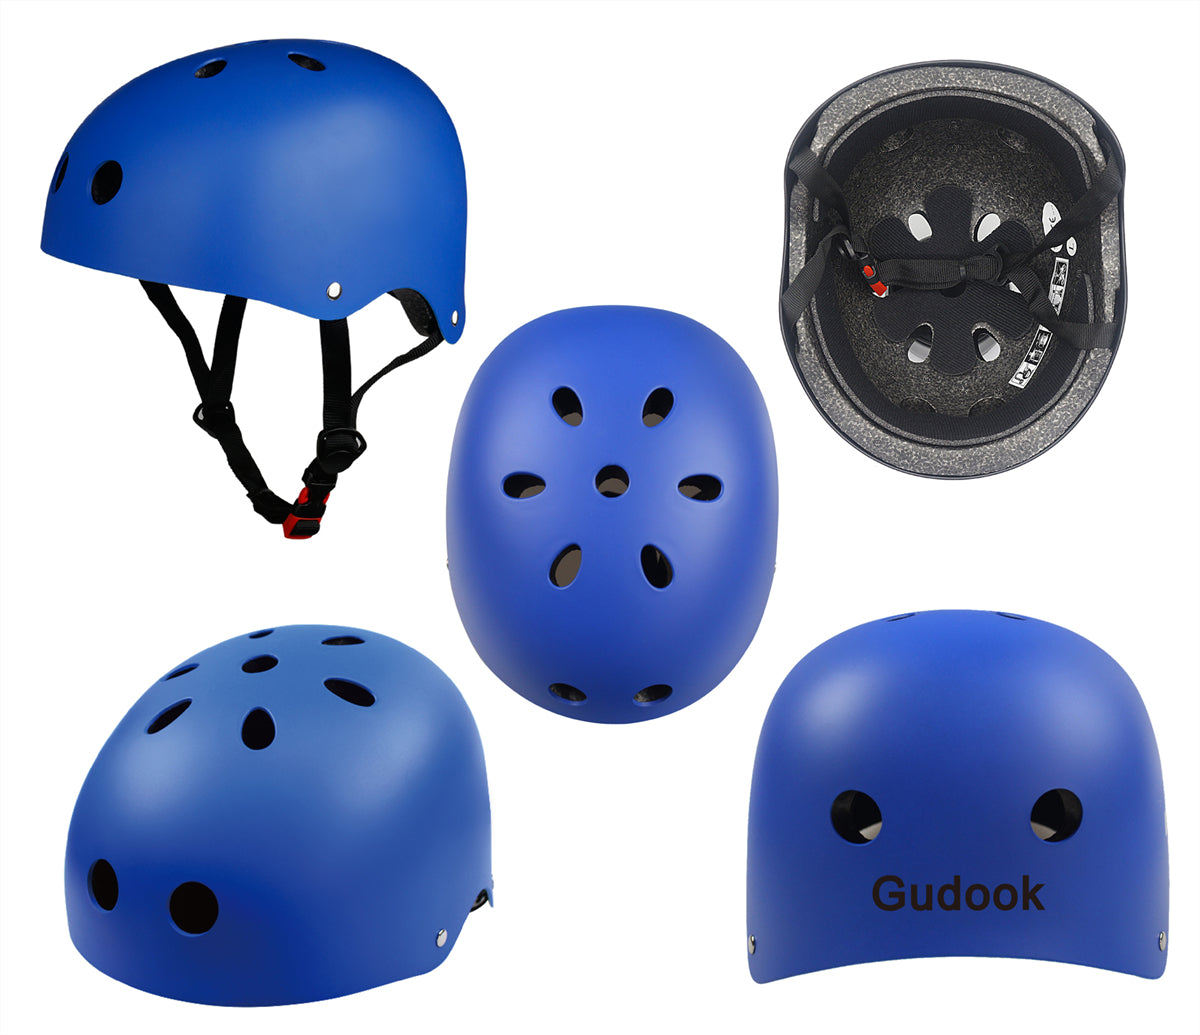 Gudook Manufacturer Hotsales Sports Safety Helmets for Cycling, Scooter